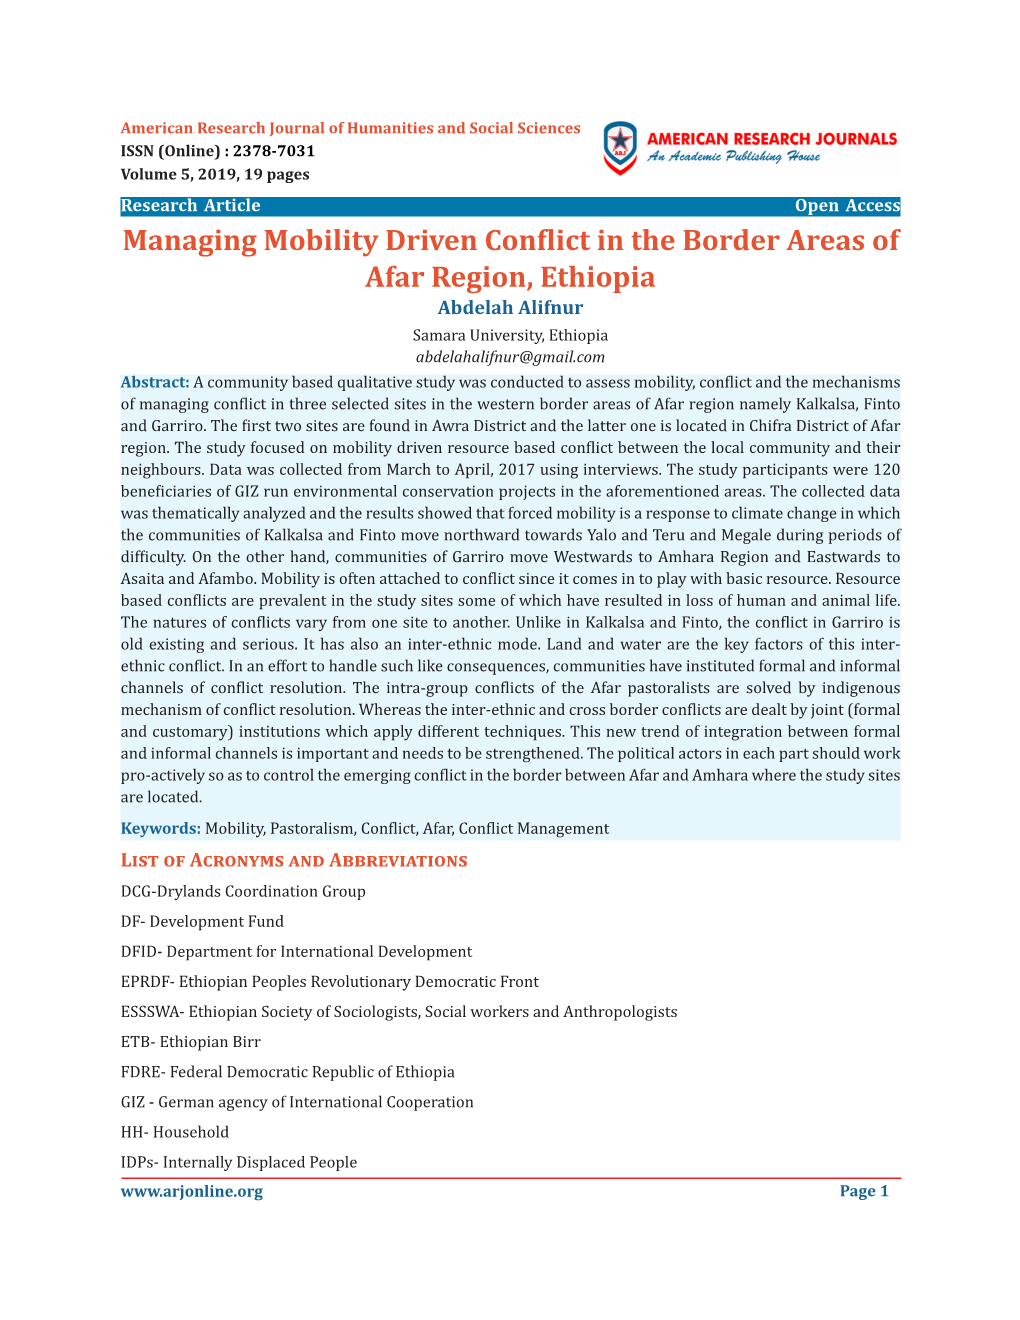 Managing Mobility Driven Conflict in the Border Areas of Afar Region, Ethiopia Abdelah Alifnur Samara University, Ethiopia Abdelahalifnur@Gmail.Com Abstract